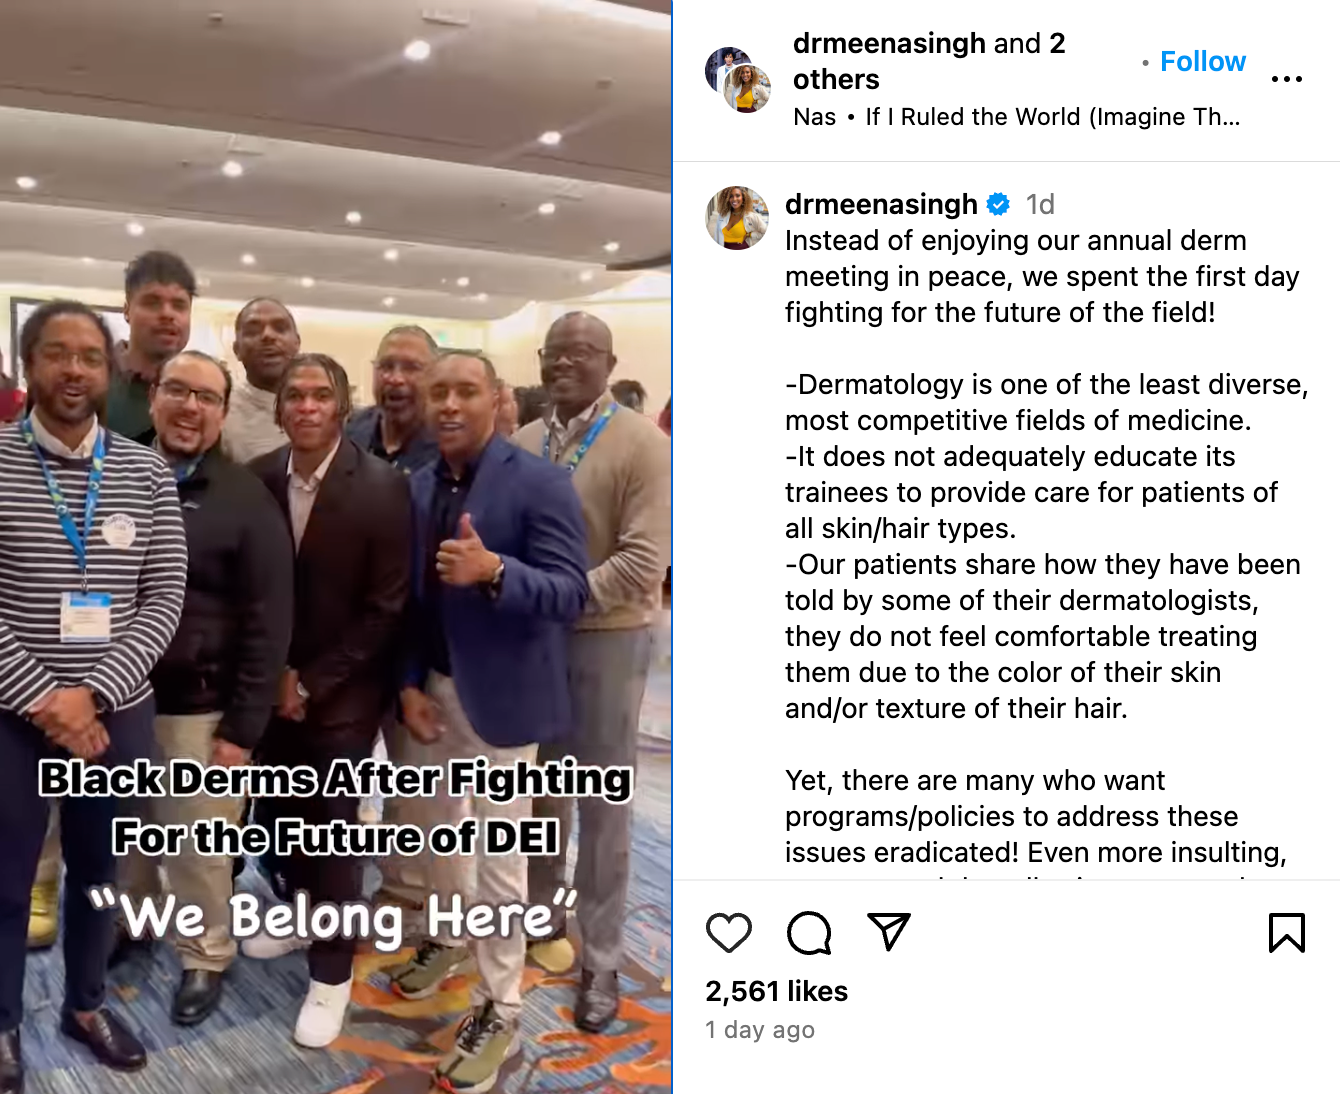 Meena Signh, MD, posted an Instagram video during AAD showing several Black dermatologists saying, "We belong here."